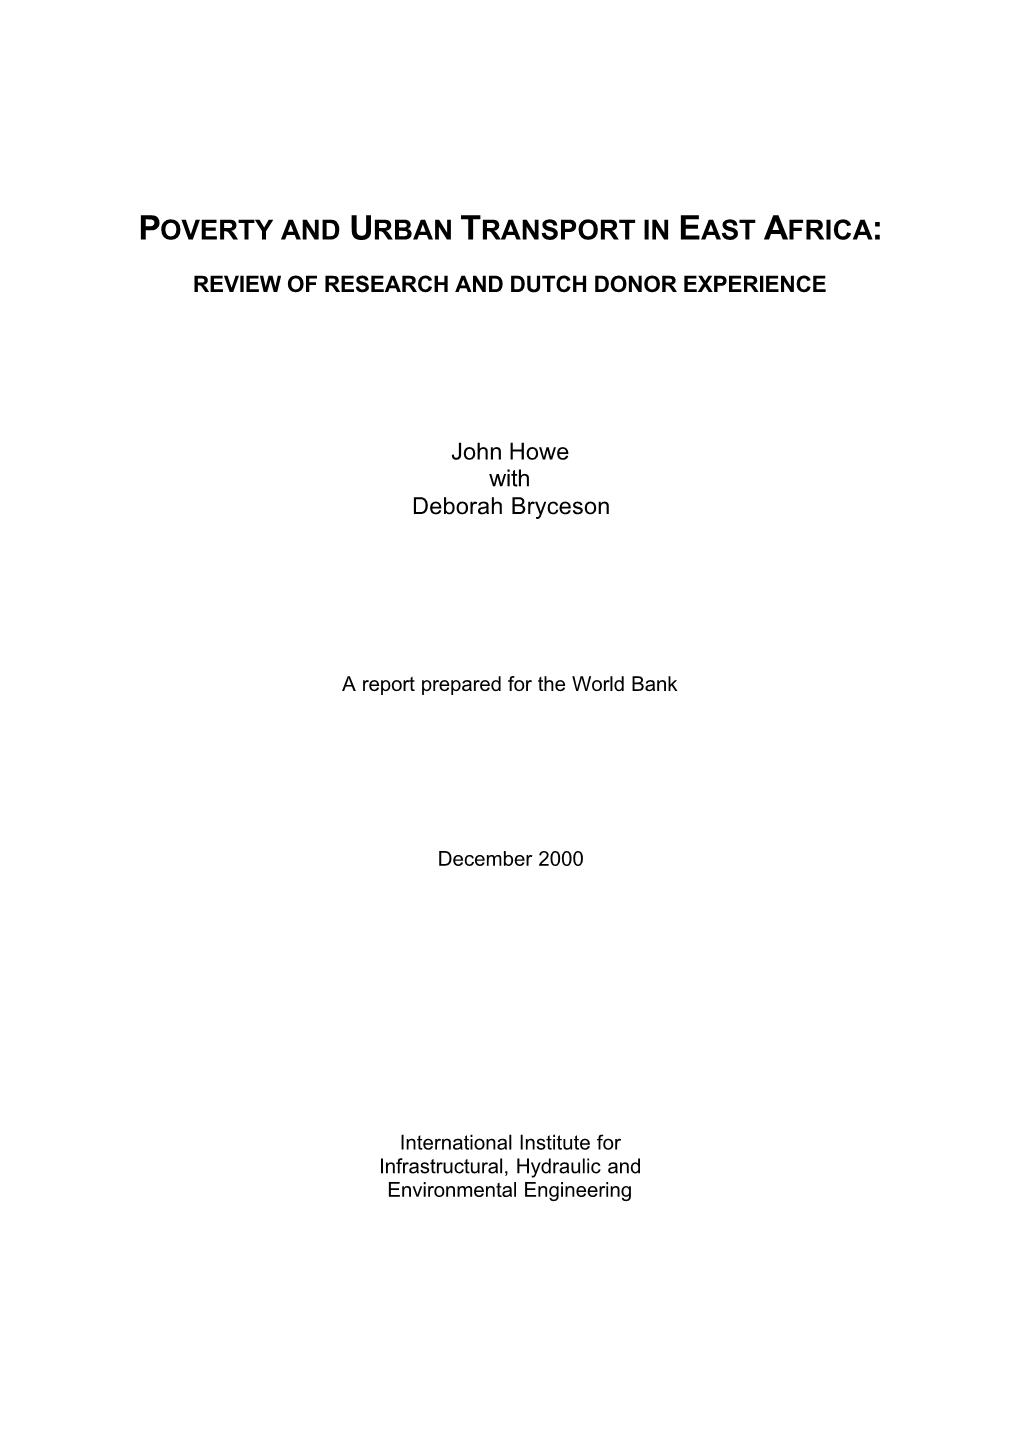 Poverty and Urban Transport in East Africa